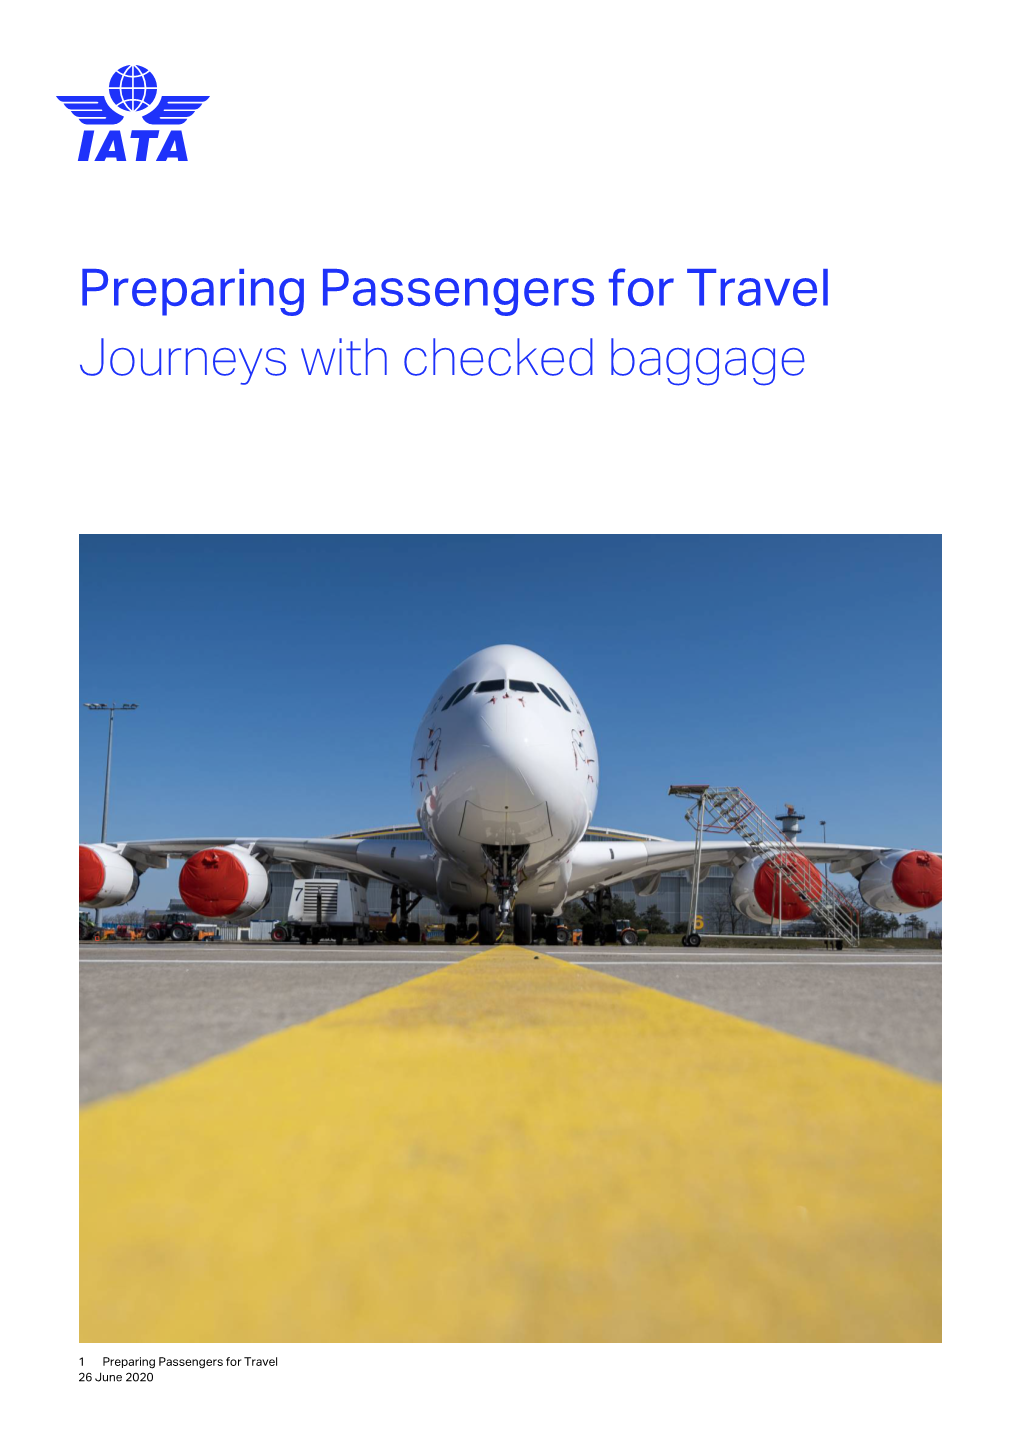 Preparing Passengers for Travel Journeys with Checked Baggage